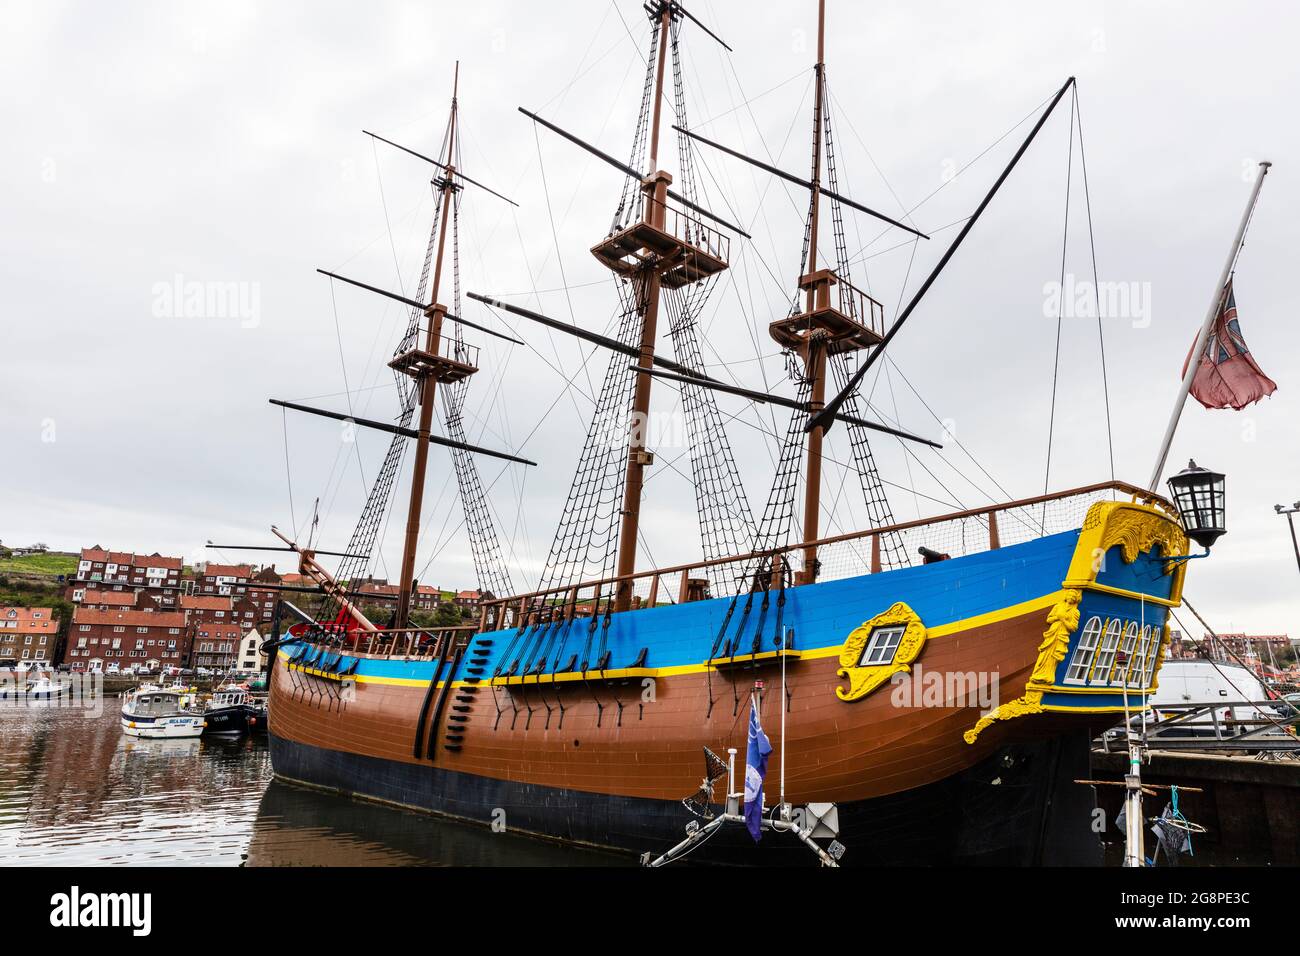 the Endeavour,the Endeavour experience,Whitby Town, Yorkshire, UK, England, It sailed around the world in the 1700s, Endeavour ship, Endeavour Whitby Stock Photo